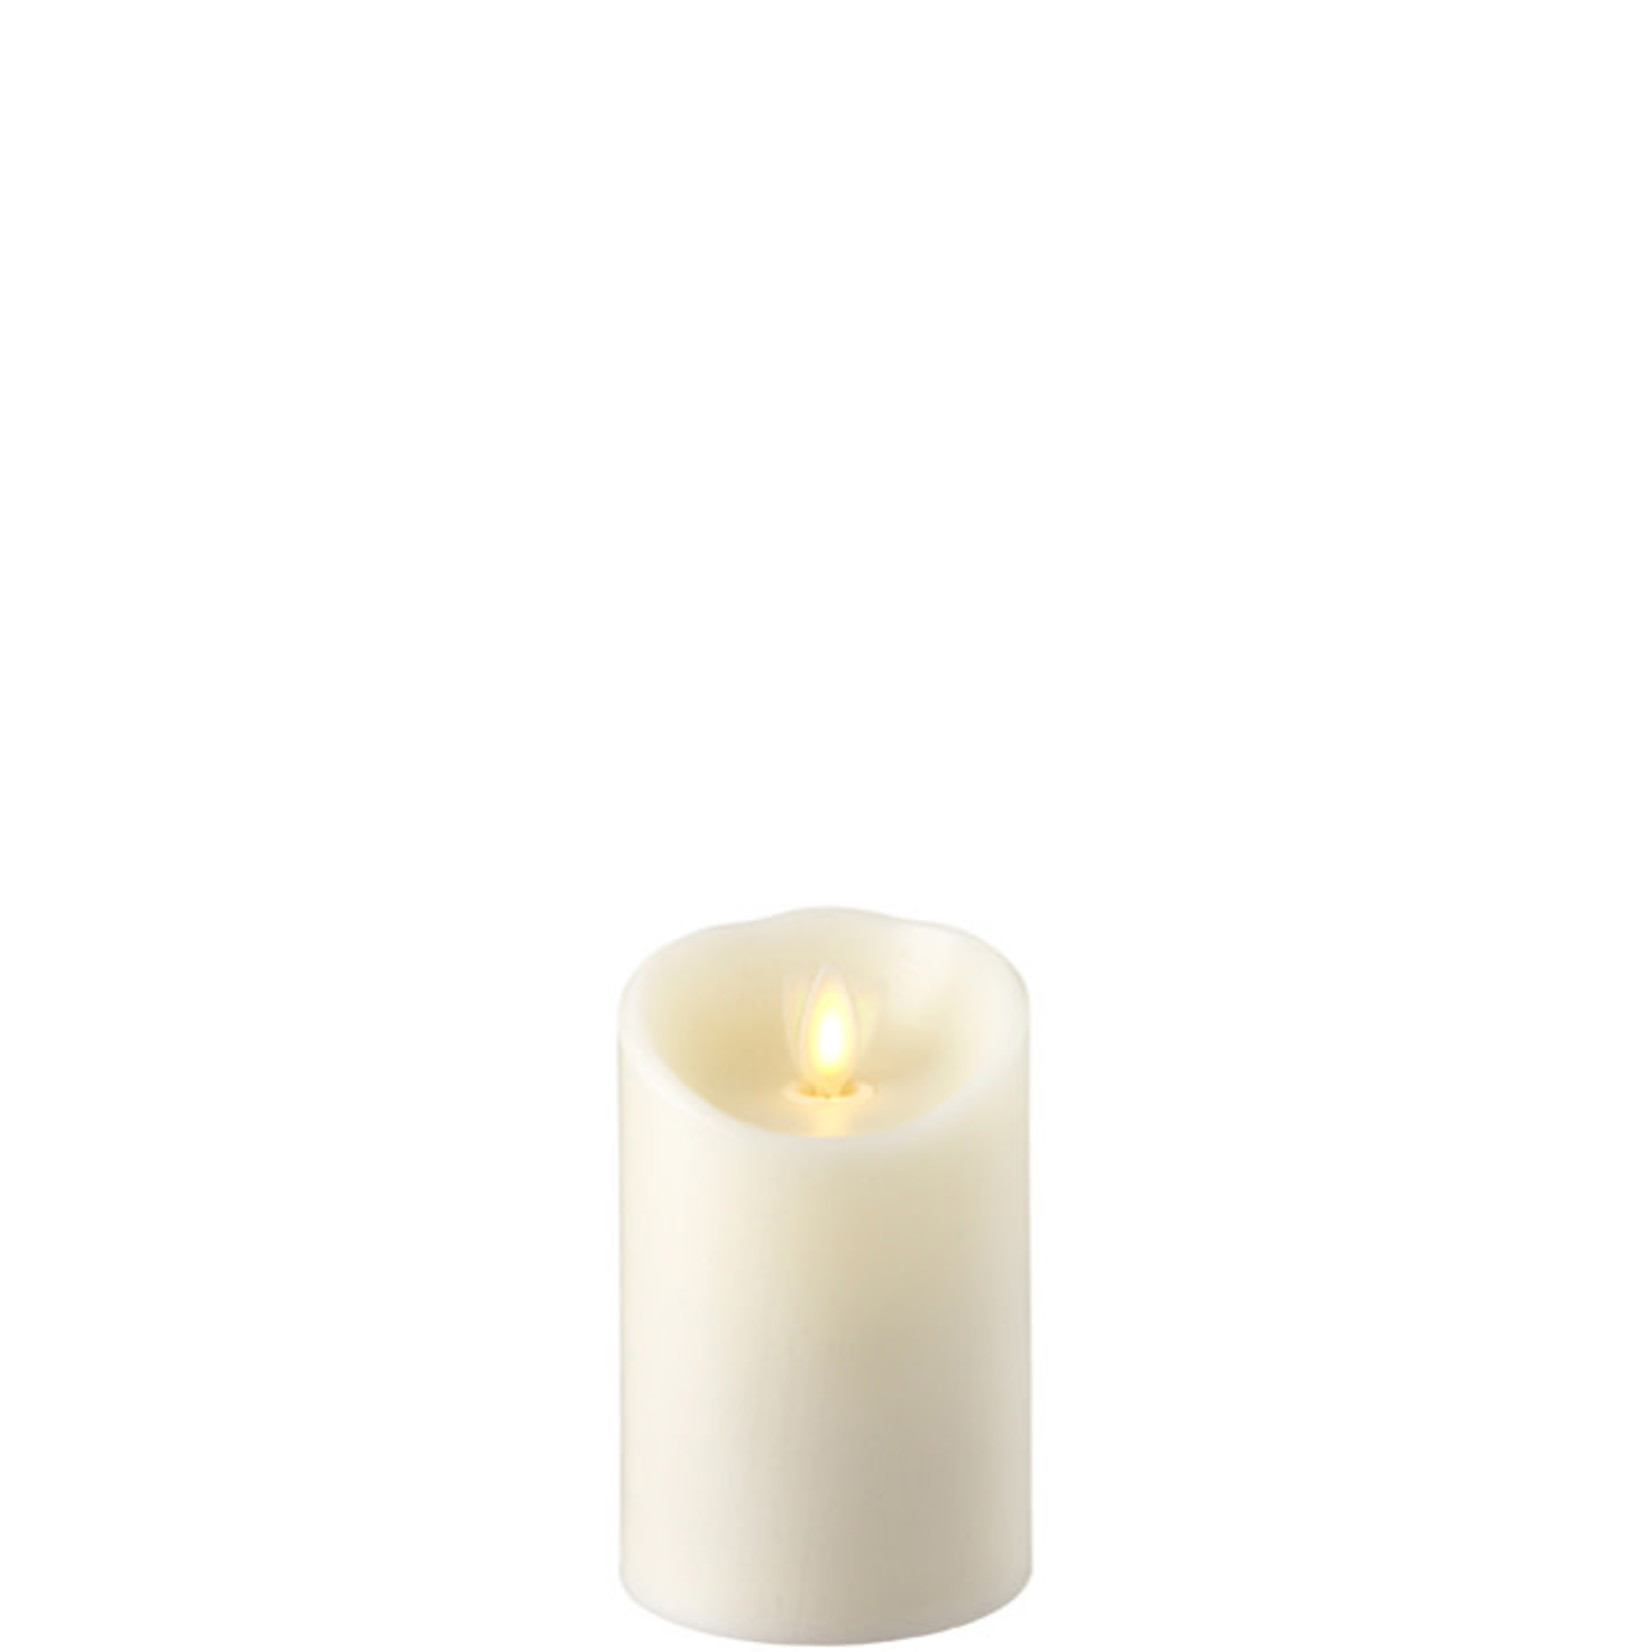 MOVING FLAME IVORY PILLAR CANDLE